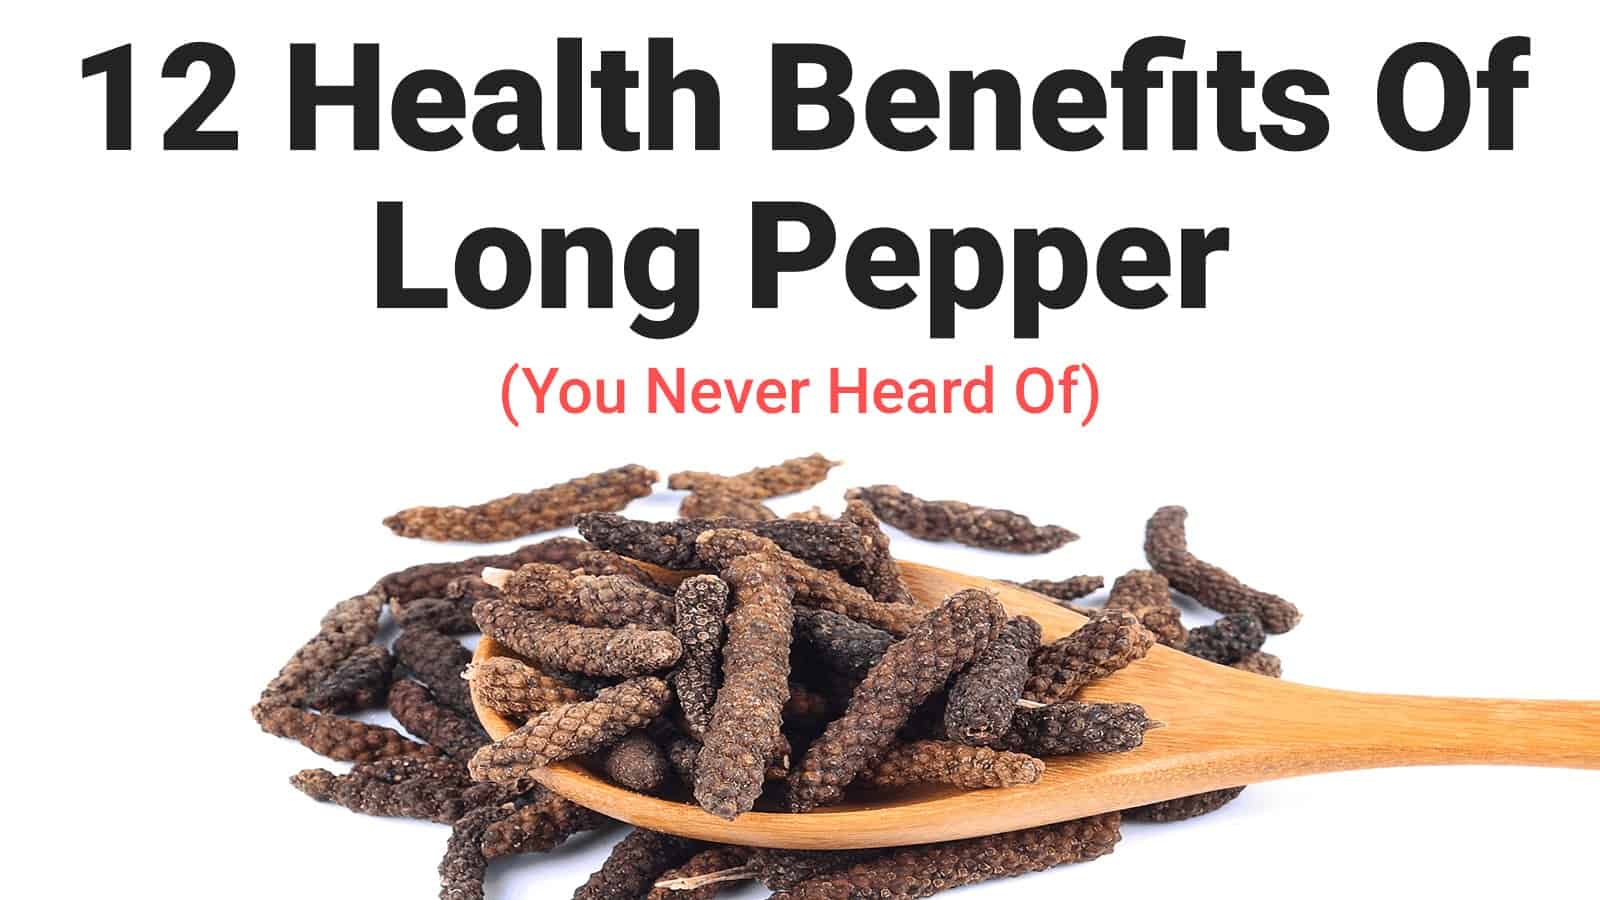 12 Health Benefits Of Long Pepper (You’ve Never Heard Of)